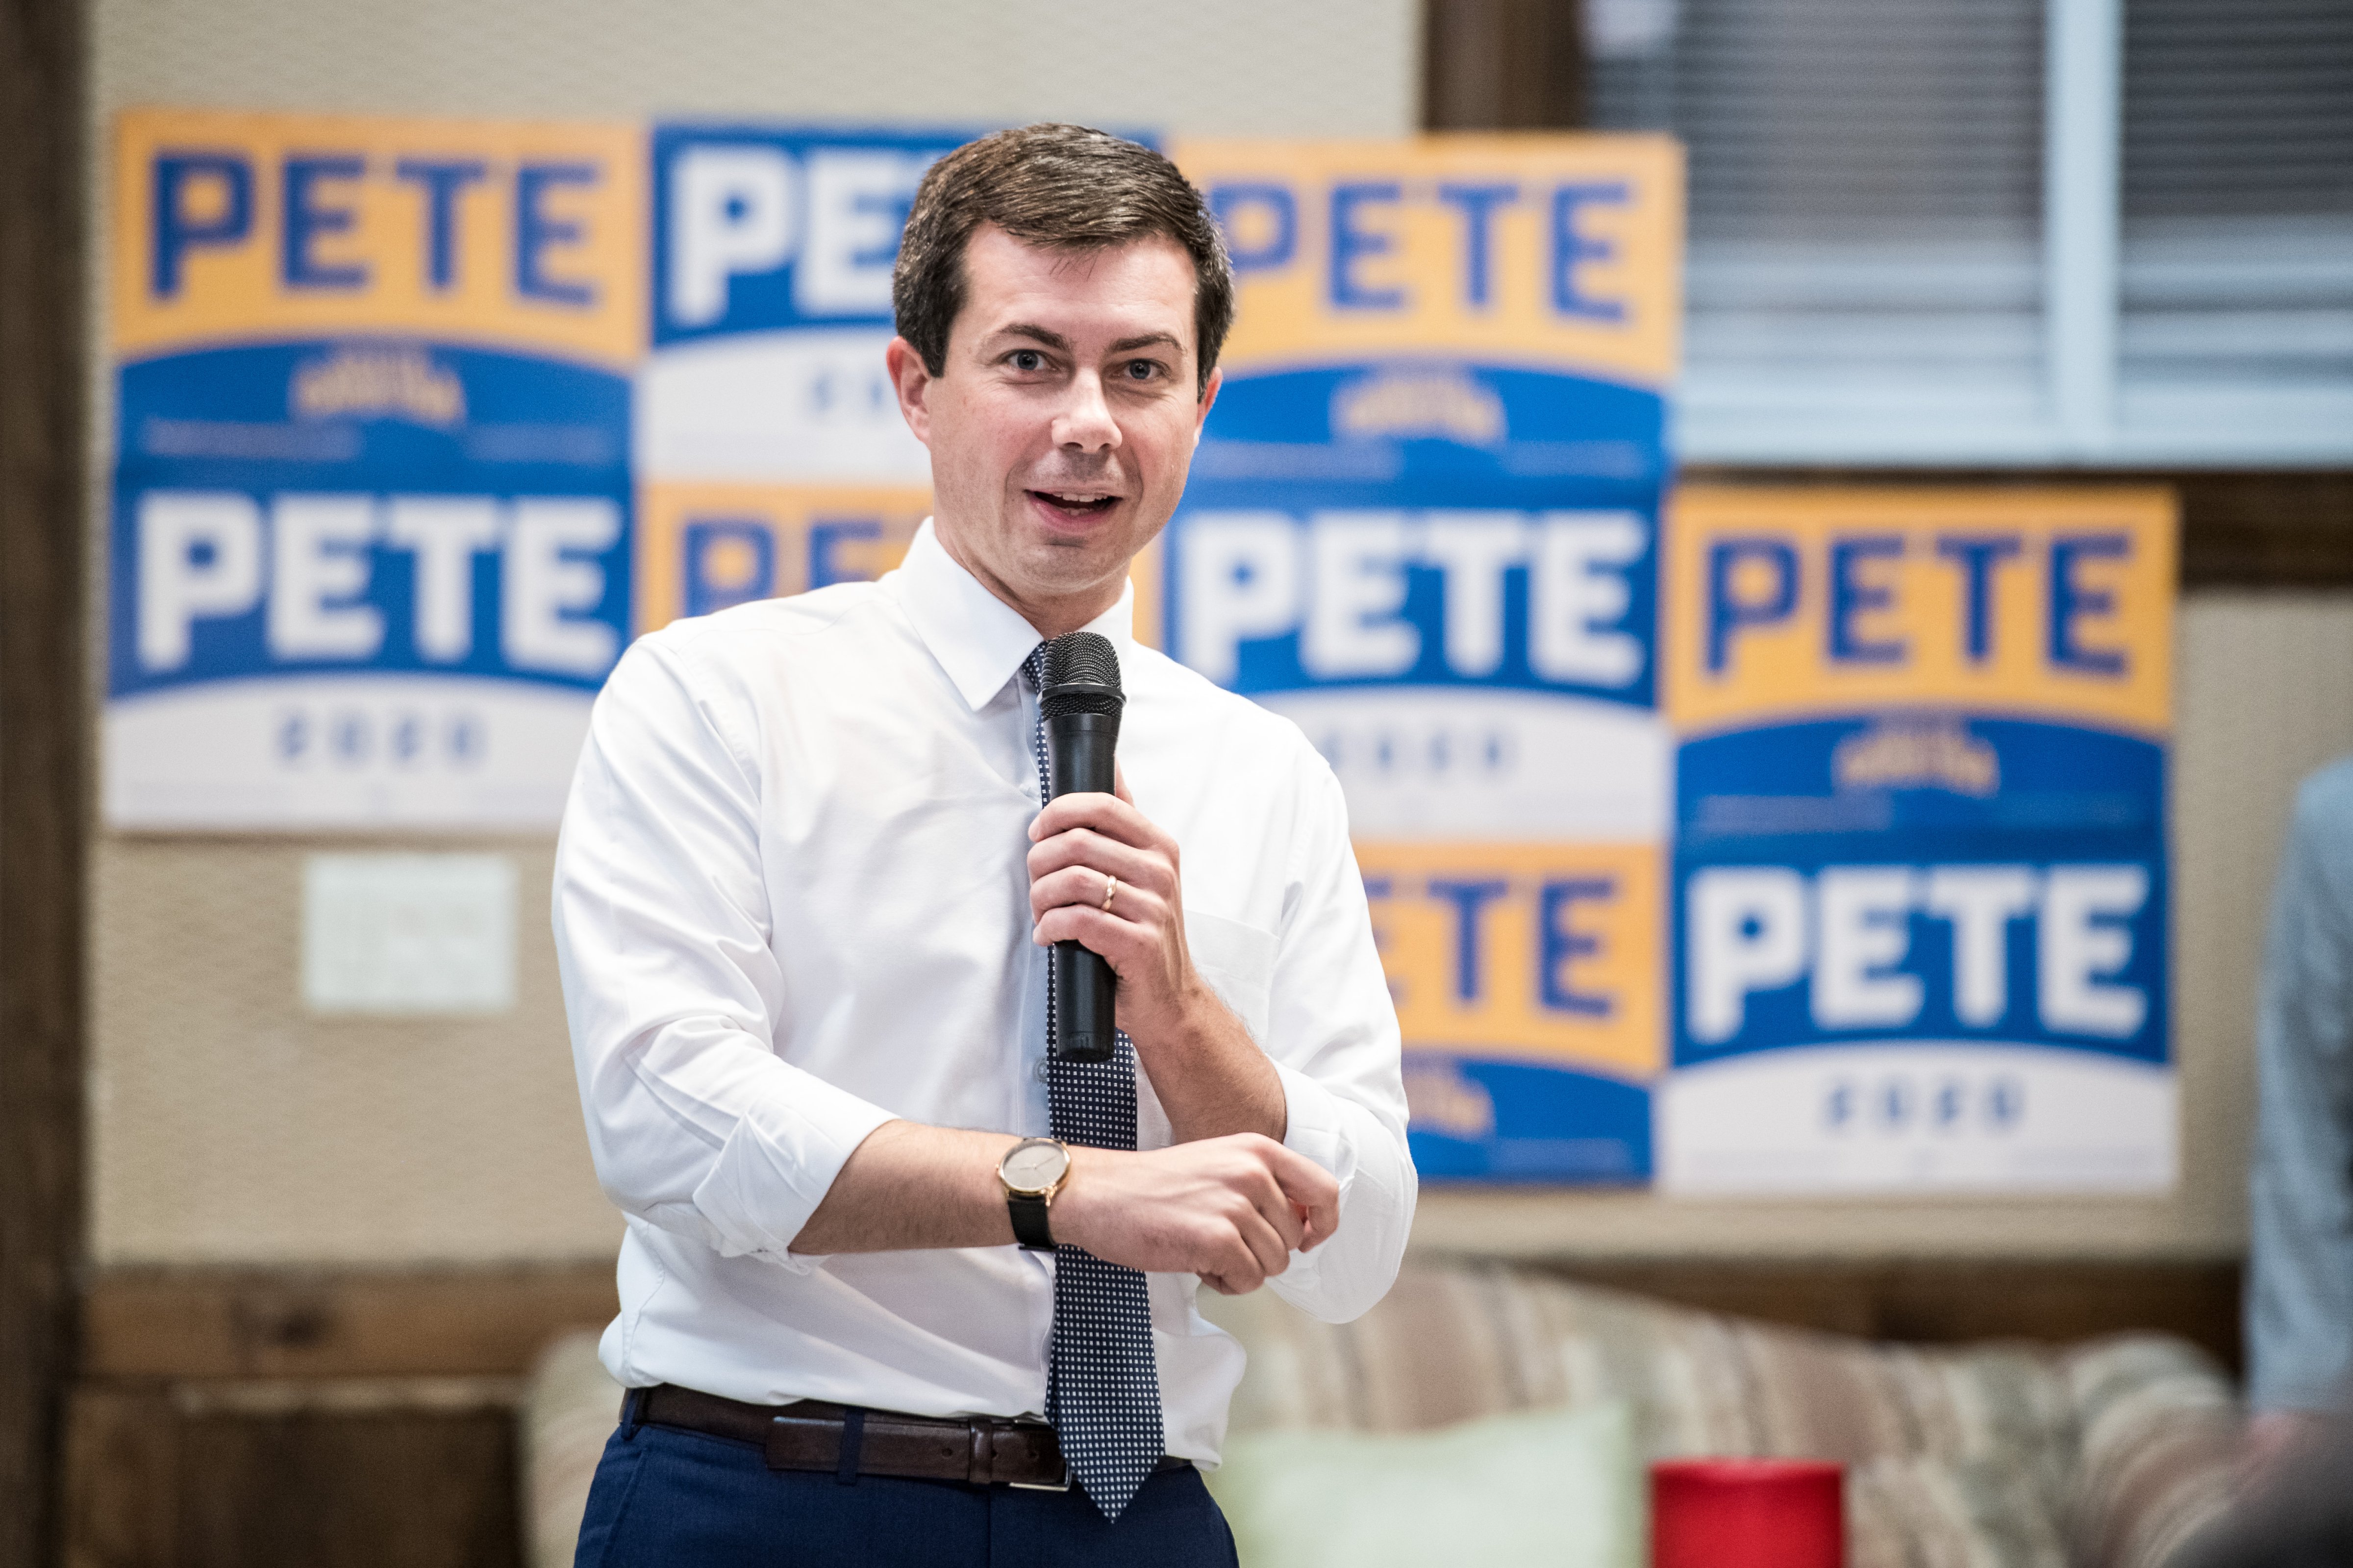 Democratic presidential candidate, South Bend, Indiana Mayor Pete Buttigieg talks to supporters during a canvassing kickoff event Oct. 27, 2019 in Rock Hill, South Carolina. (Sean Rayford&mdash;Getty Images)